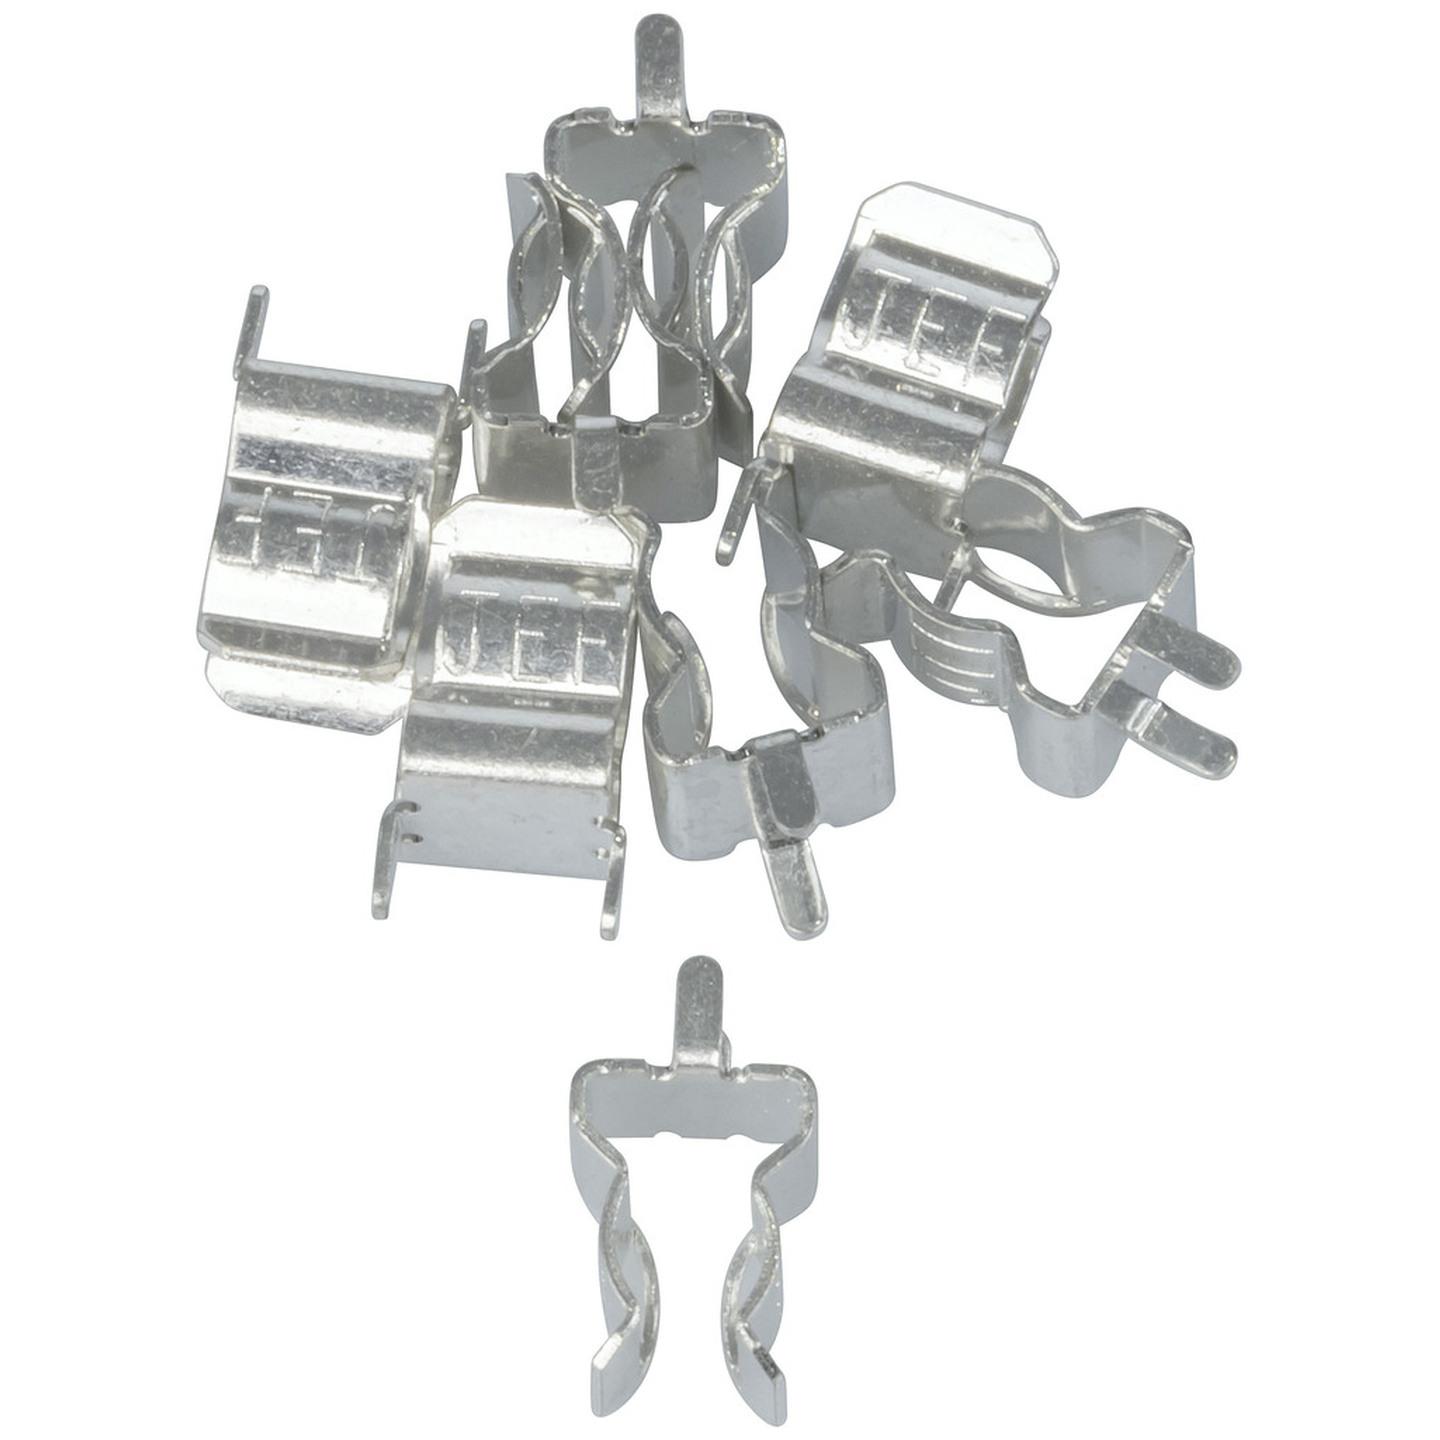 3AG Fuseclips 8 Pack